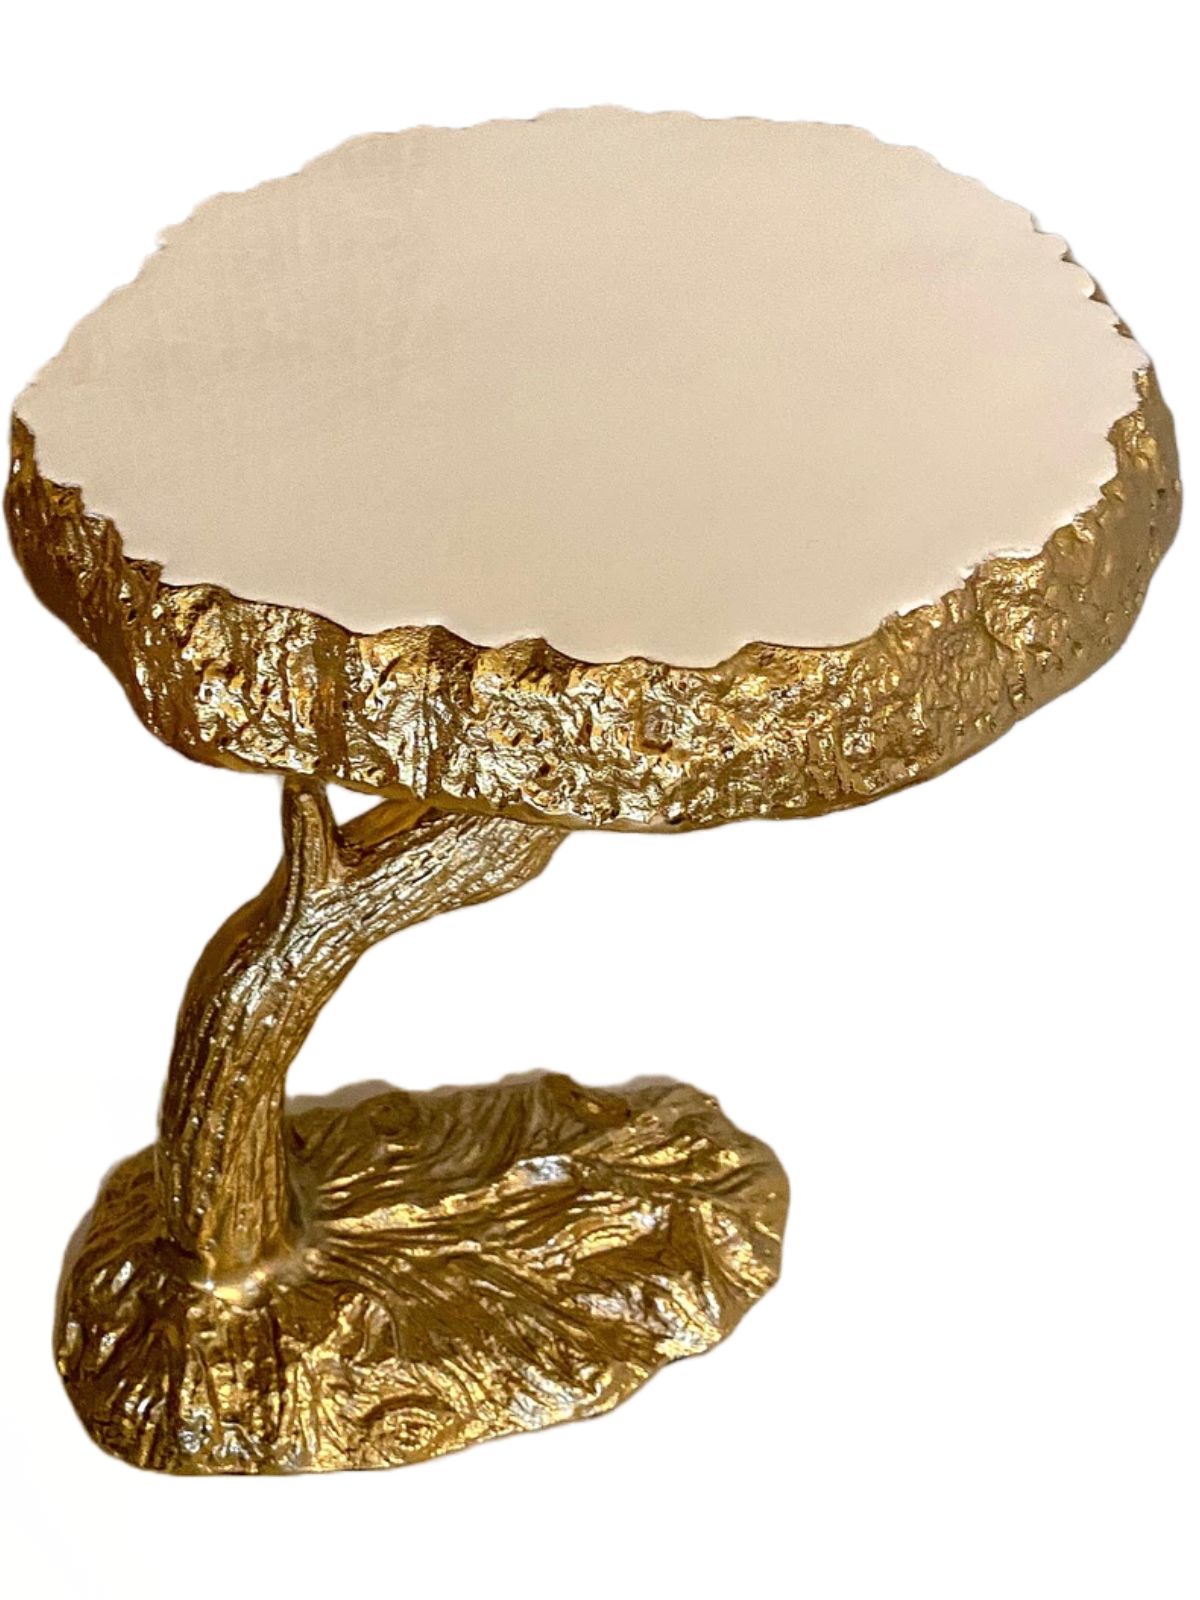 12.25H White Marble Cake Stand With Gold  Stainless Steel Tree Designed Base, sold by KYA Home Decor.